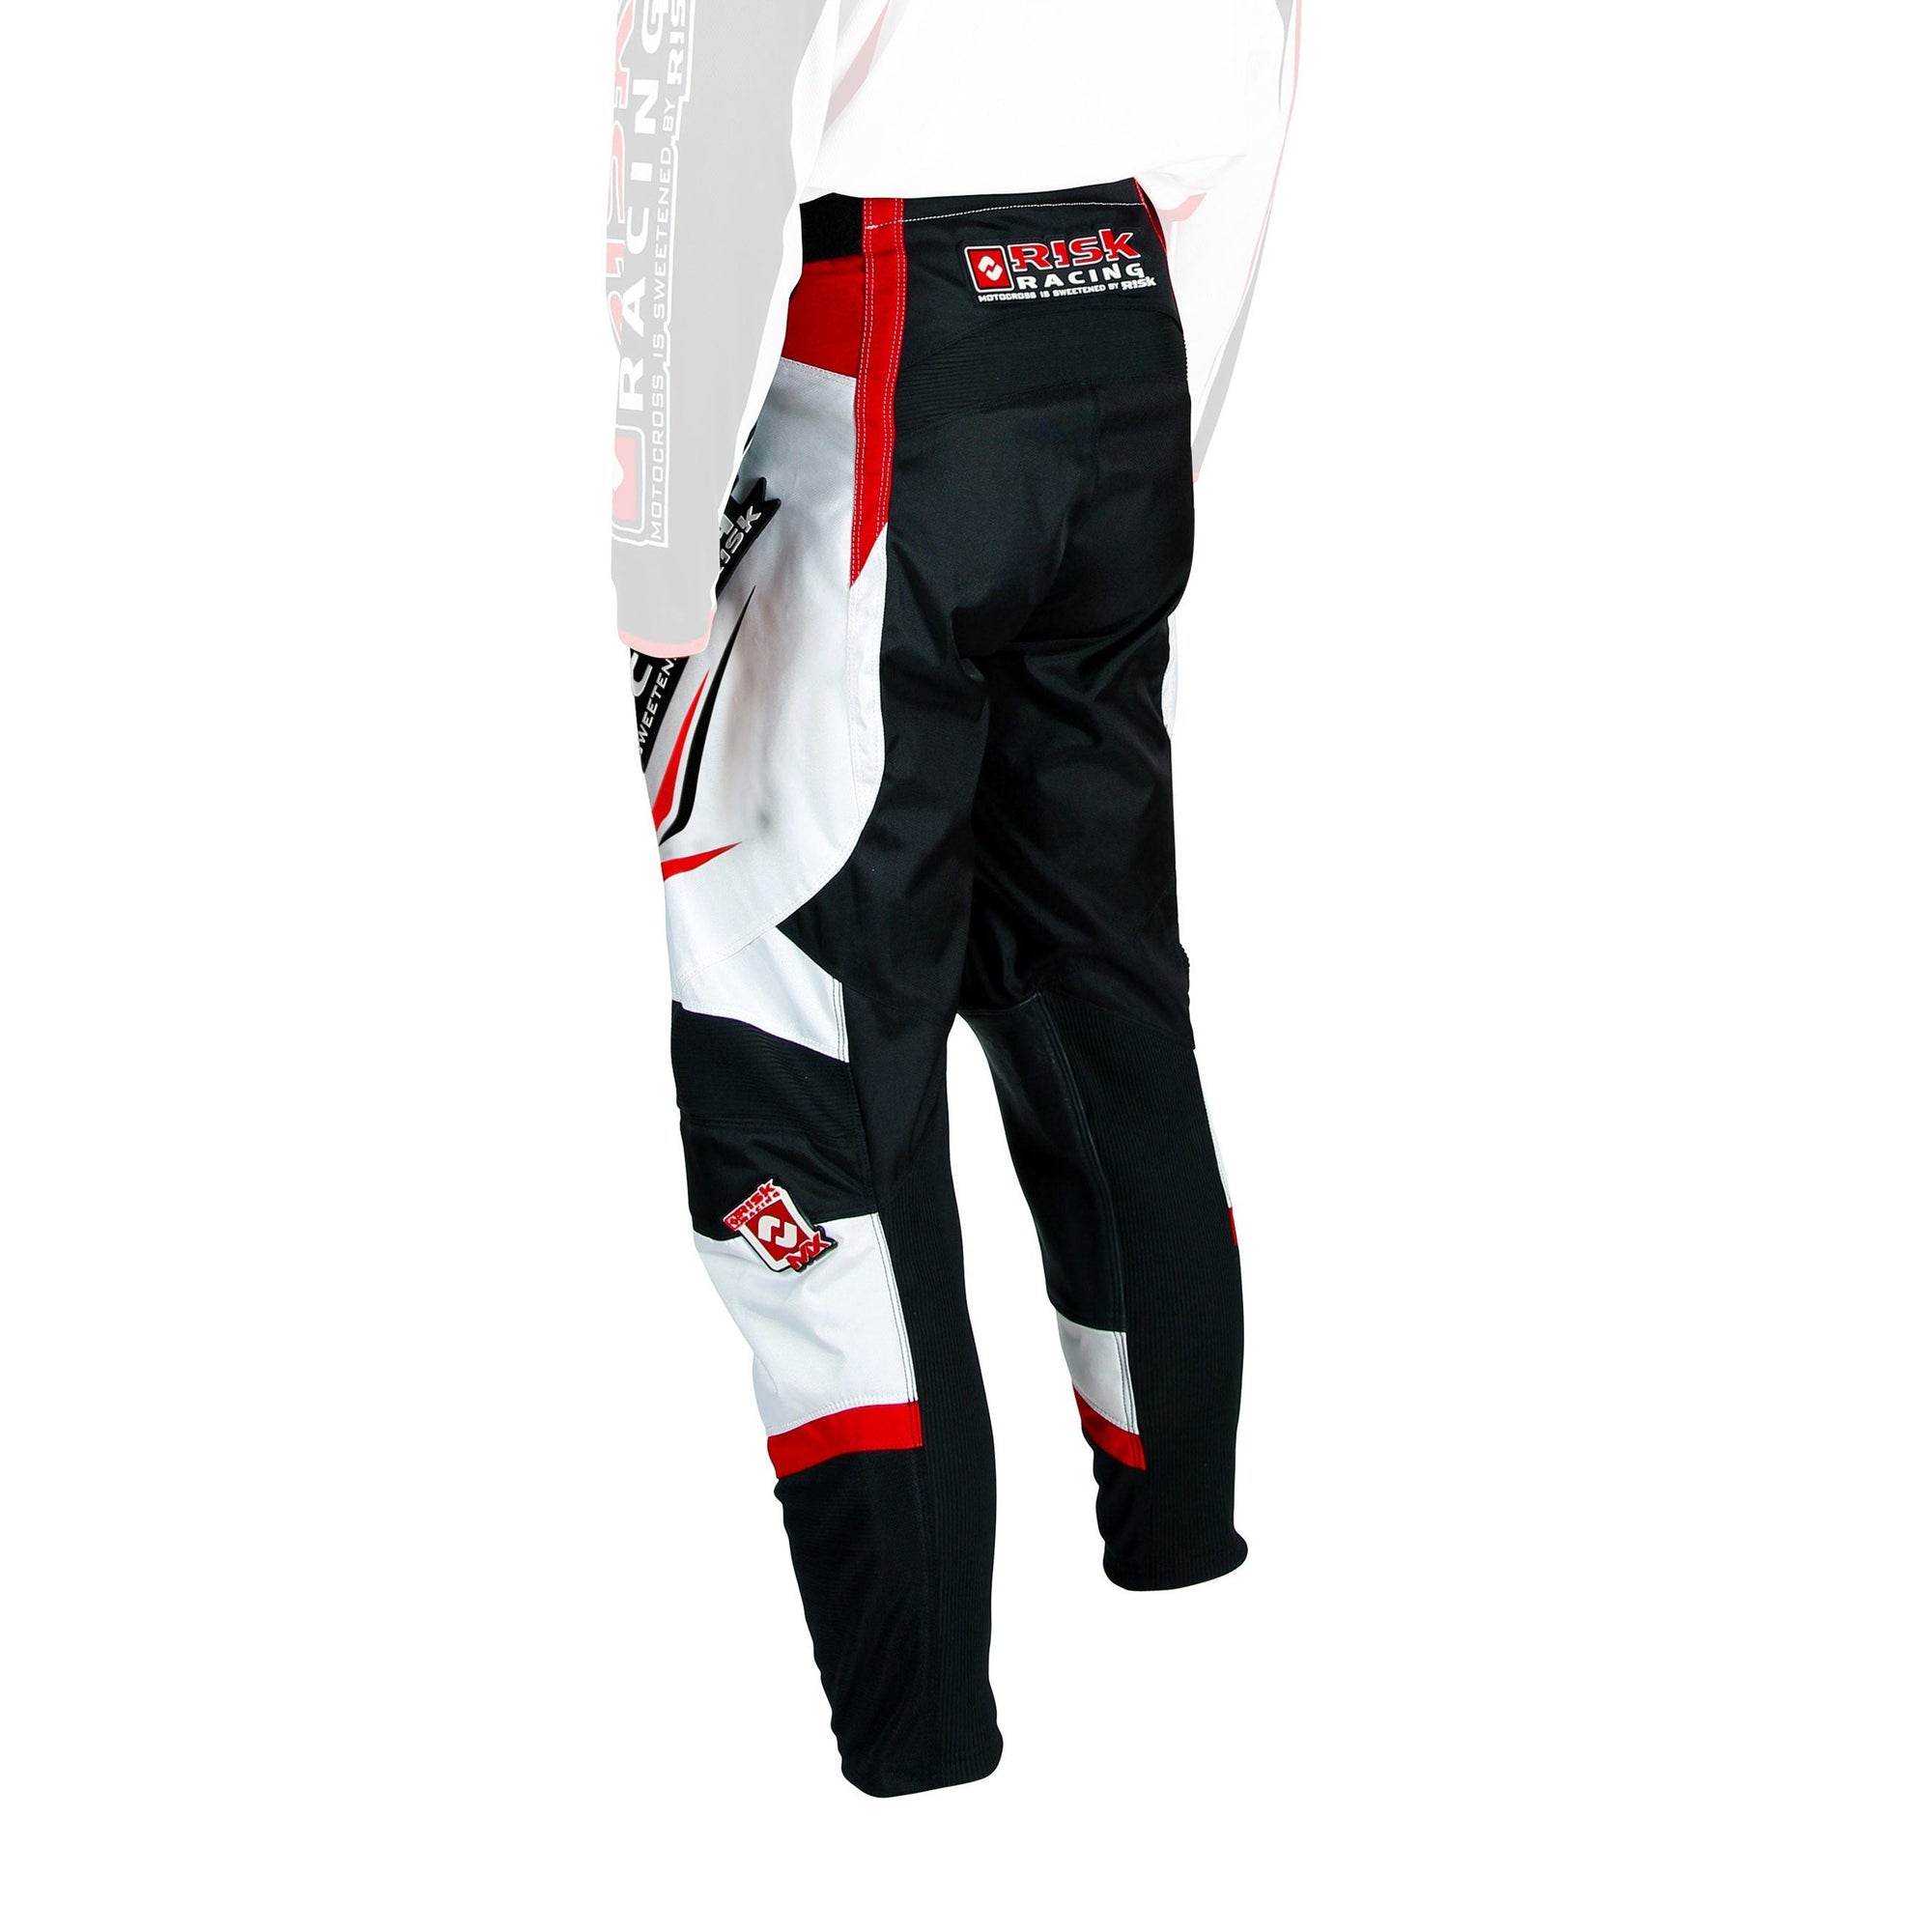 Risk Racing Vector MX Motocross Pant - front